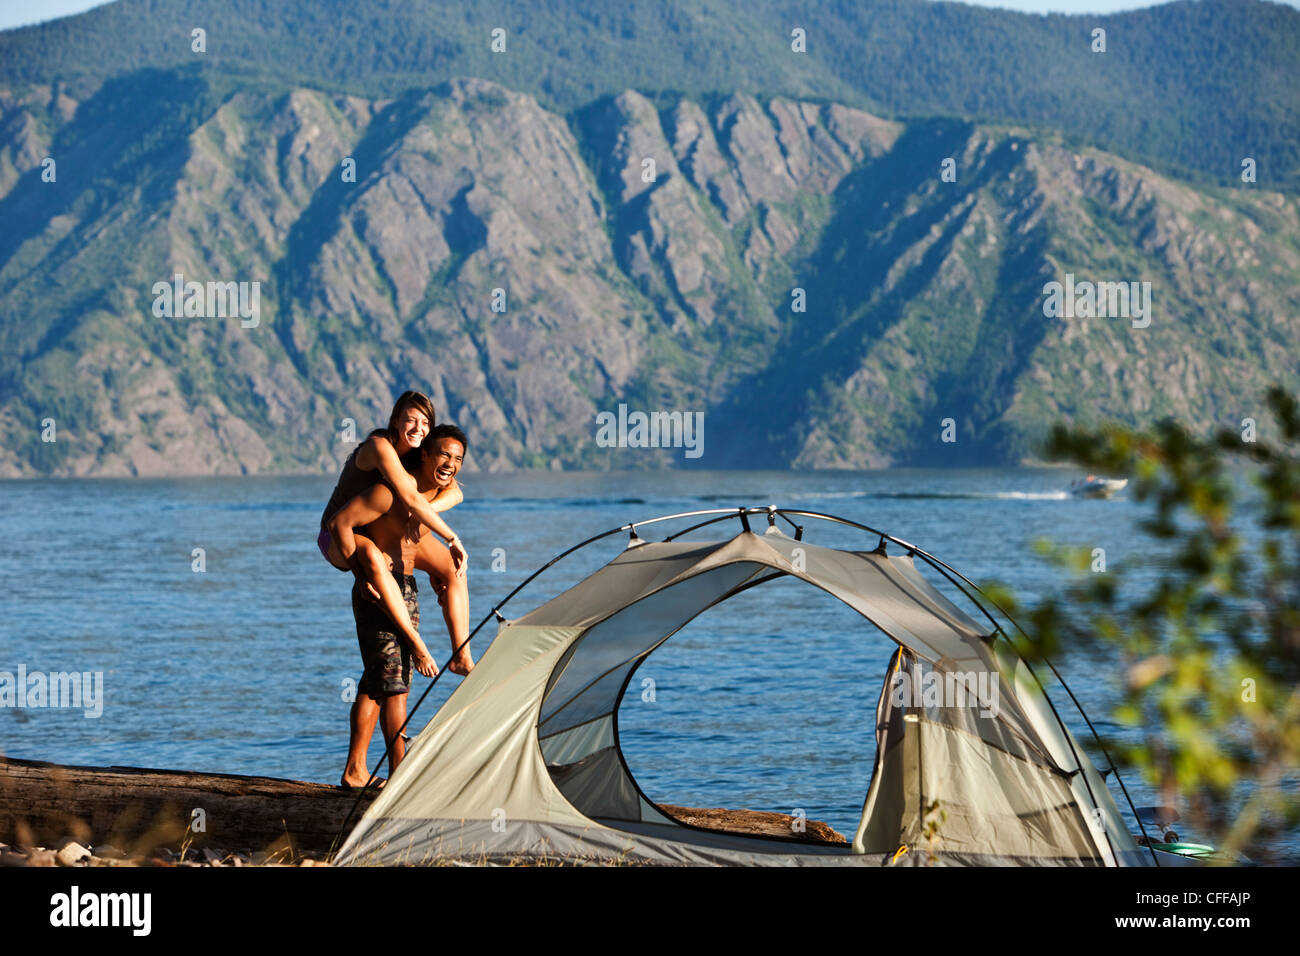 A happy young adult couple smile and laugh on a camping trip next to a lake in Idaho. Stock Photo